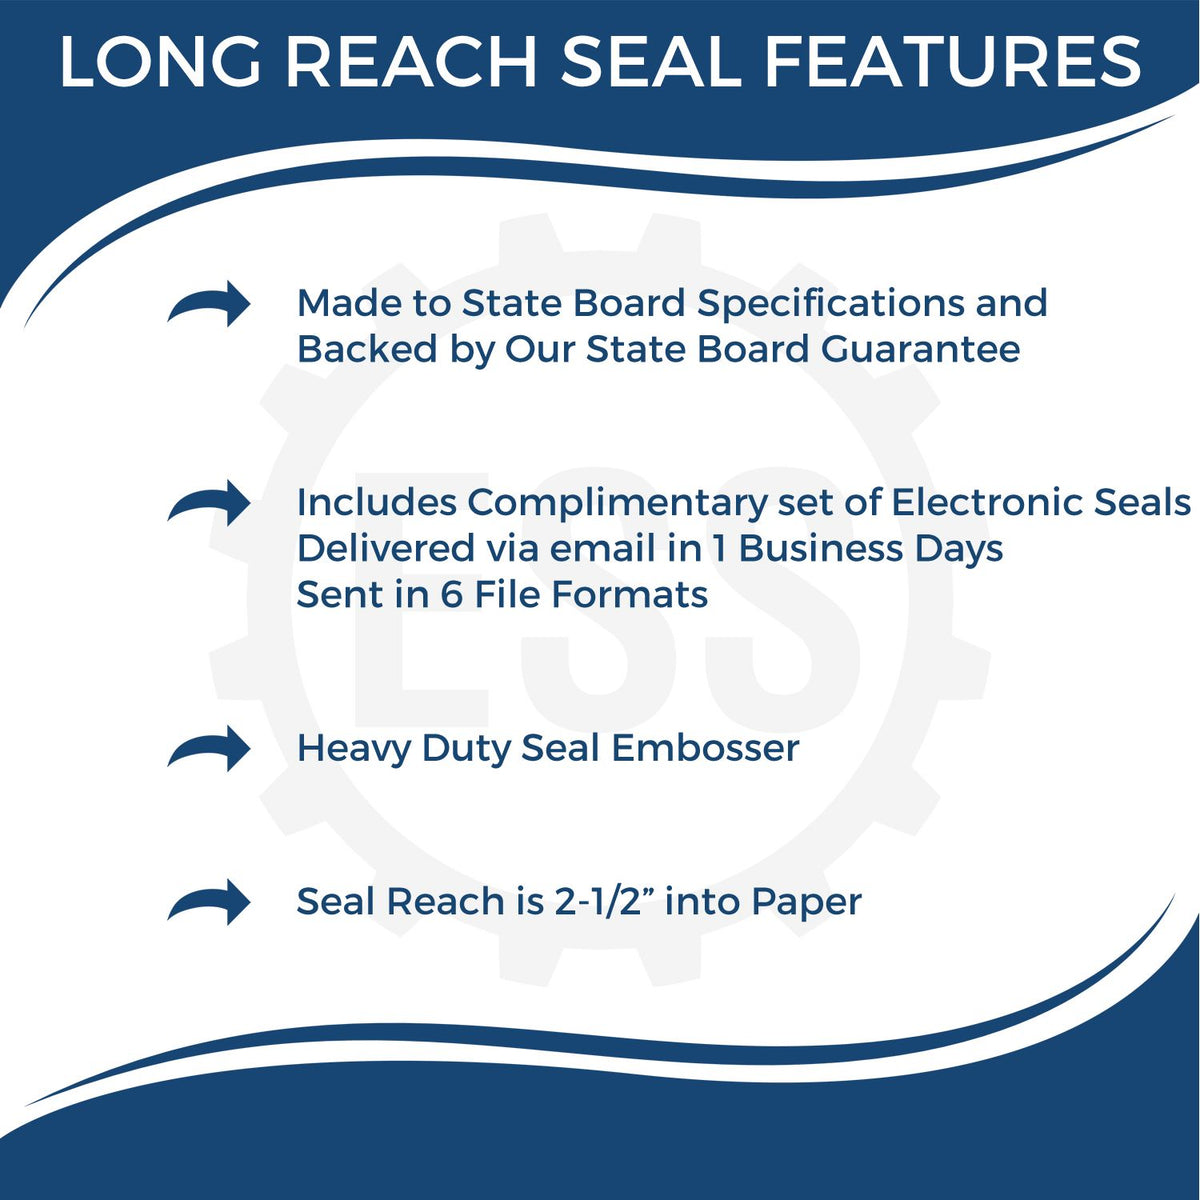 A picture of an infographic highlighting the selling points for the Long Reach Tennessee Geology Seal